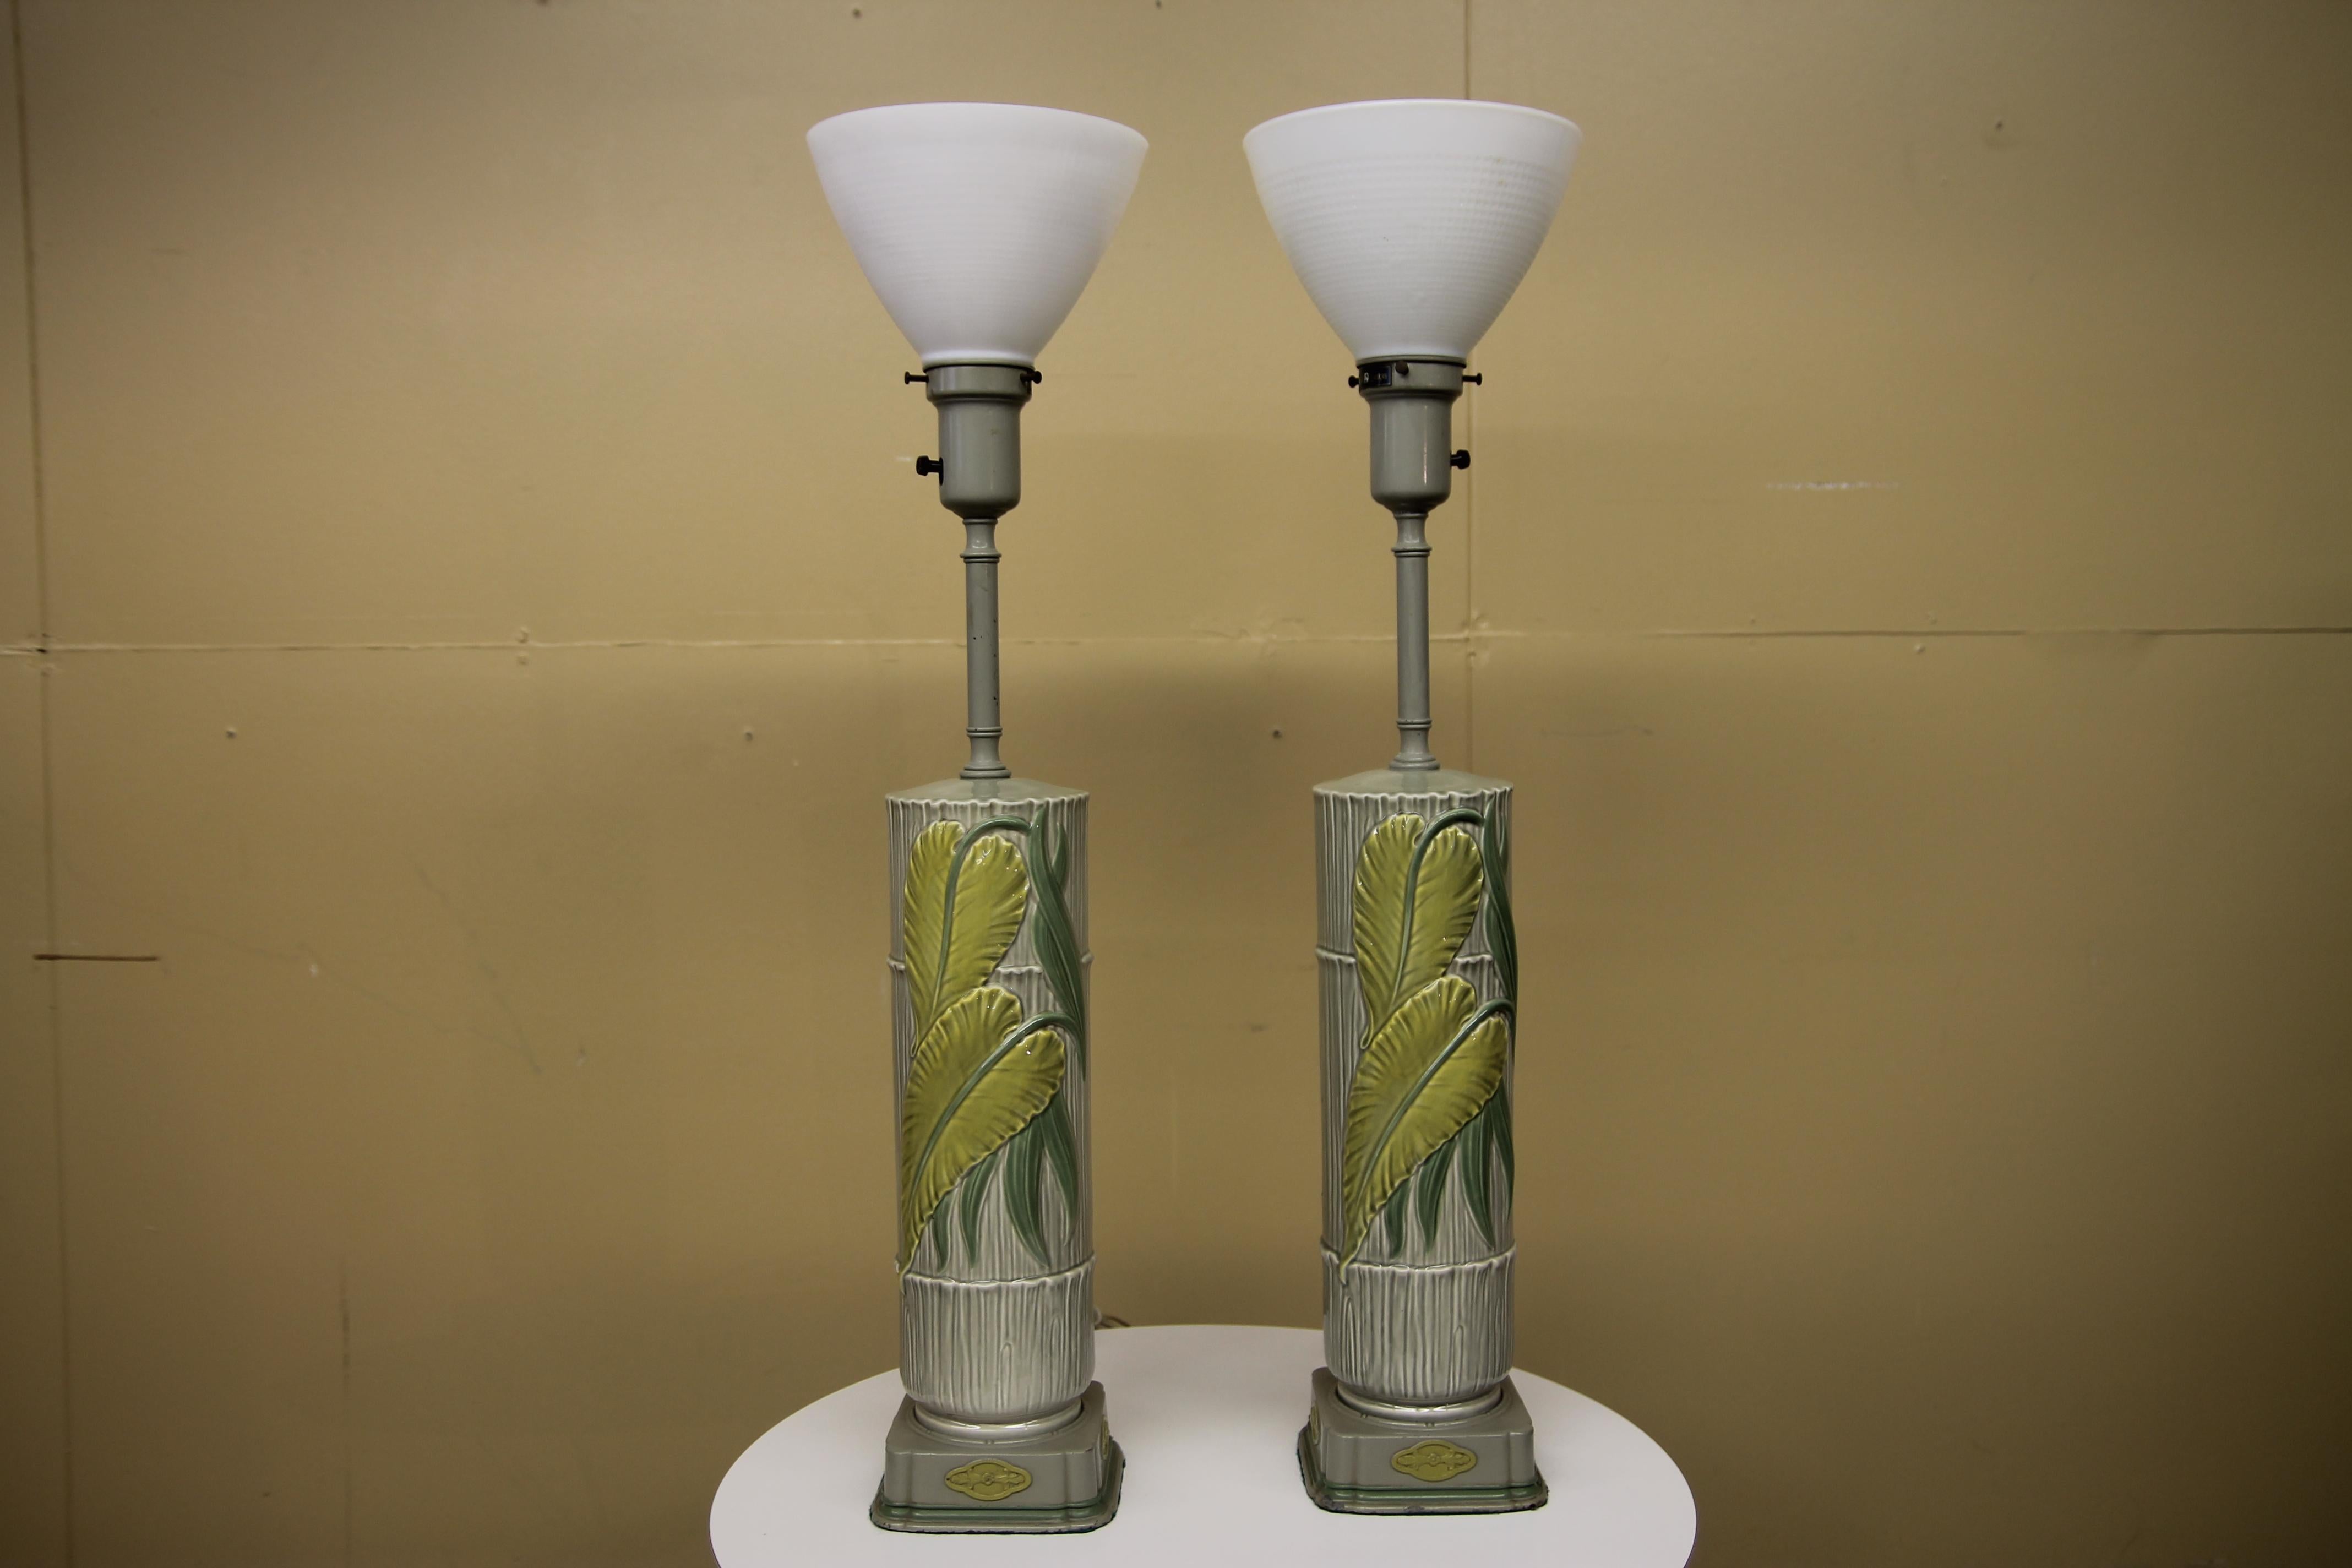 Wonderful pair of Rembrandt table lamps in amazing original condition. These 1950s ceramic lamps have a great tropical feel to them with the look of bamboo and raised leaves. I have not found this example for sale on any sites.